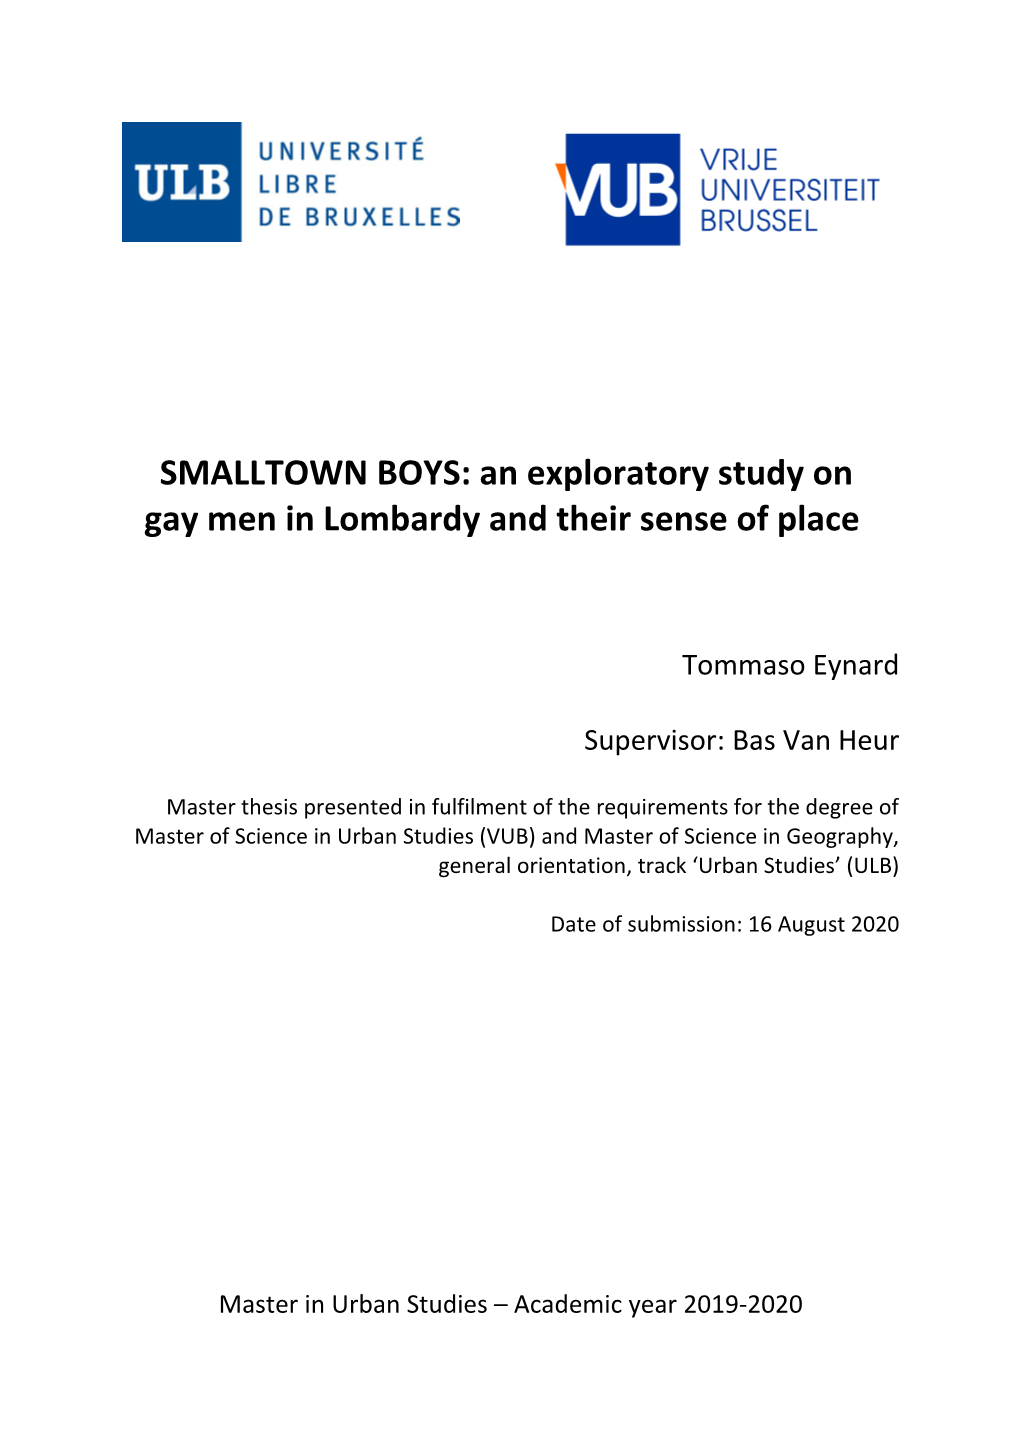 An Exploratory Study on Gay Men in Lombardy and Their Sense of Place